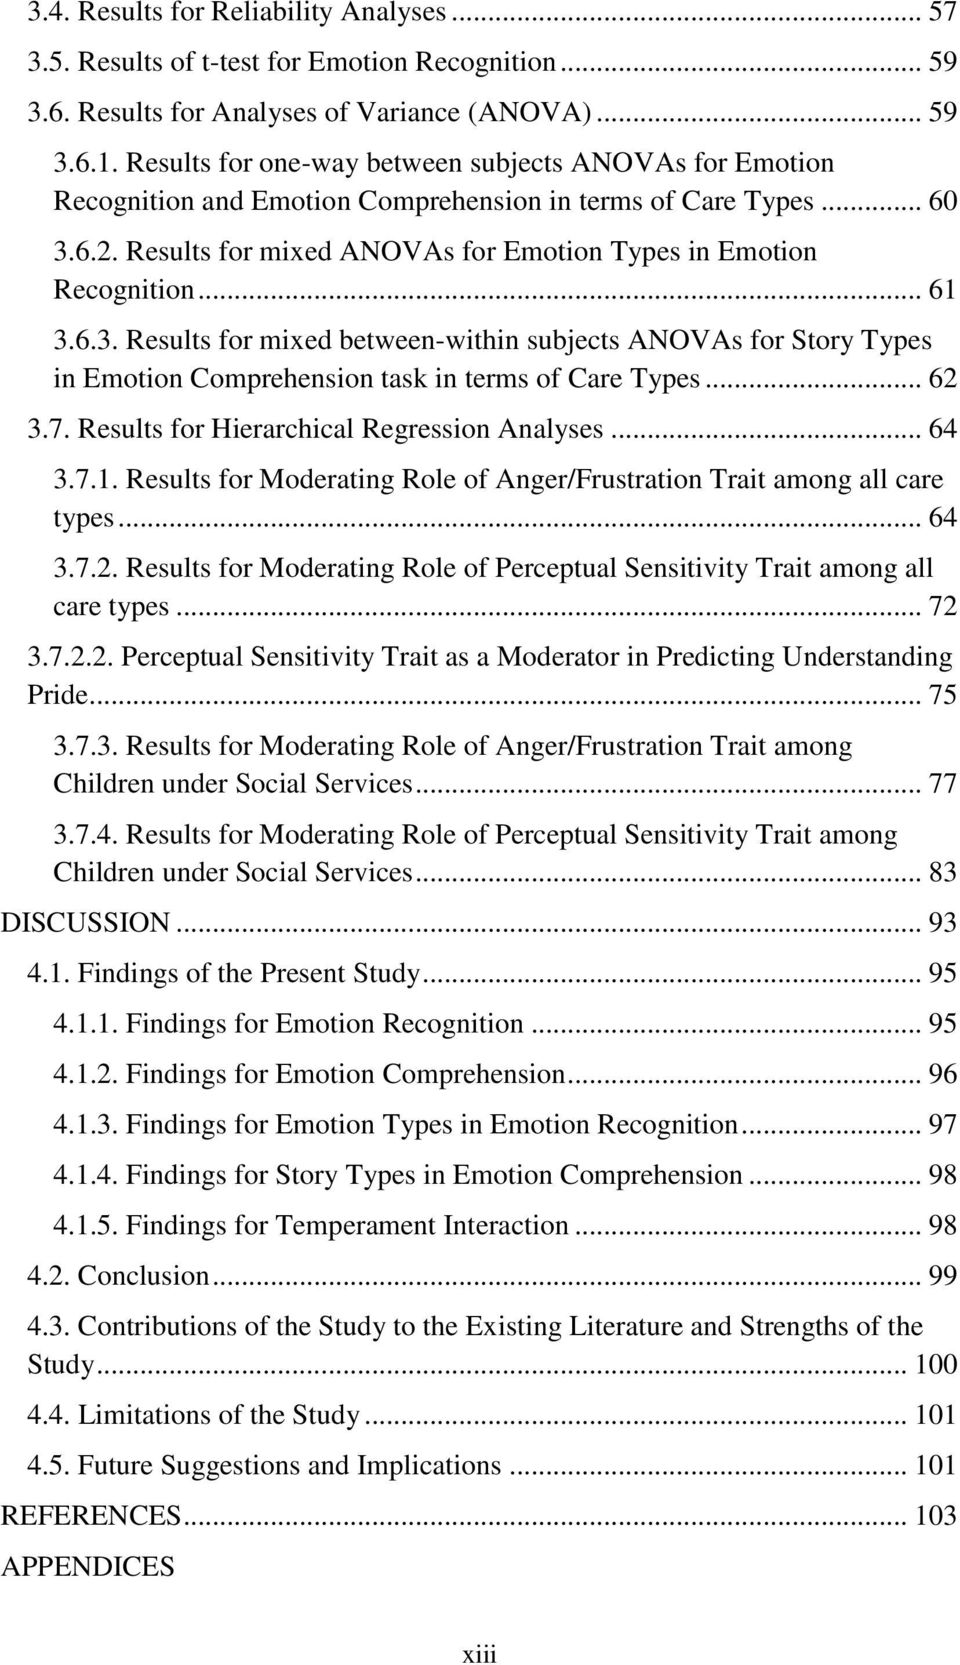 .. 61 3.6.3. Results for mixed between-within subjects ANOVAs for Story Types in Emotion Comprehension task in terms of Care Types... 62 3.7. Results for Hierarchical Regression Analyses... 64 3.7.1. Results for Moderating Role of Anger/Frustration Trait among all care types.